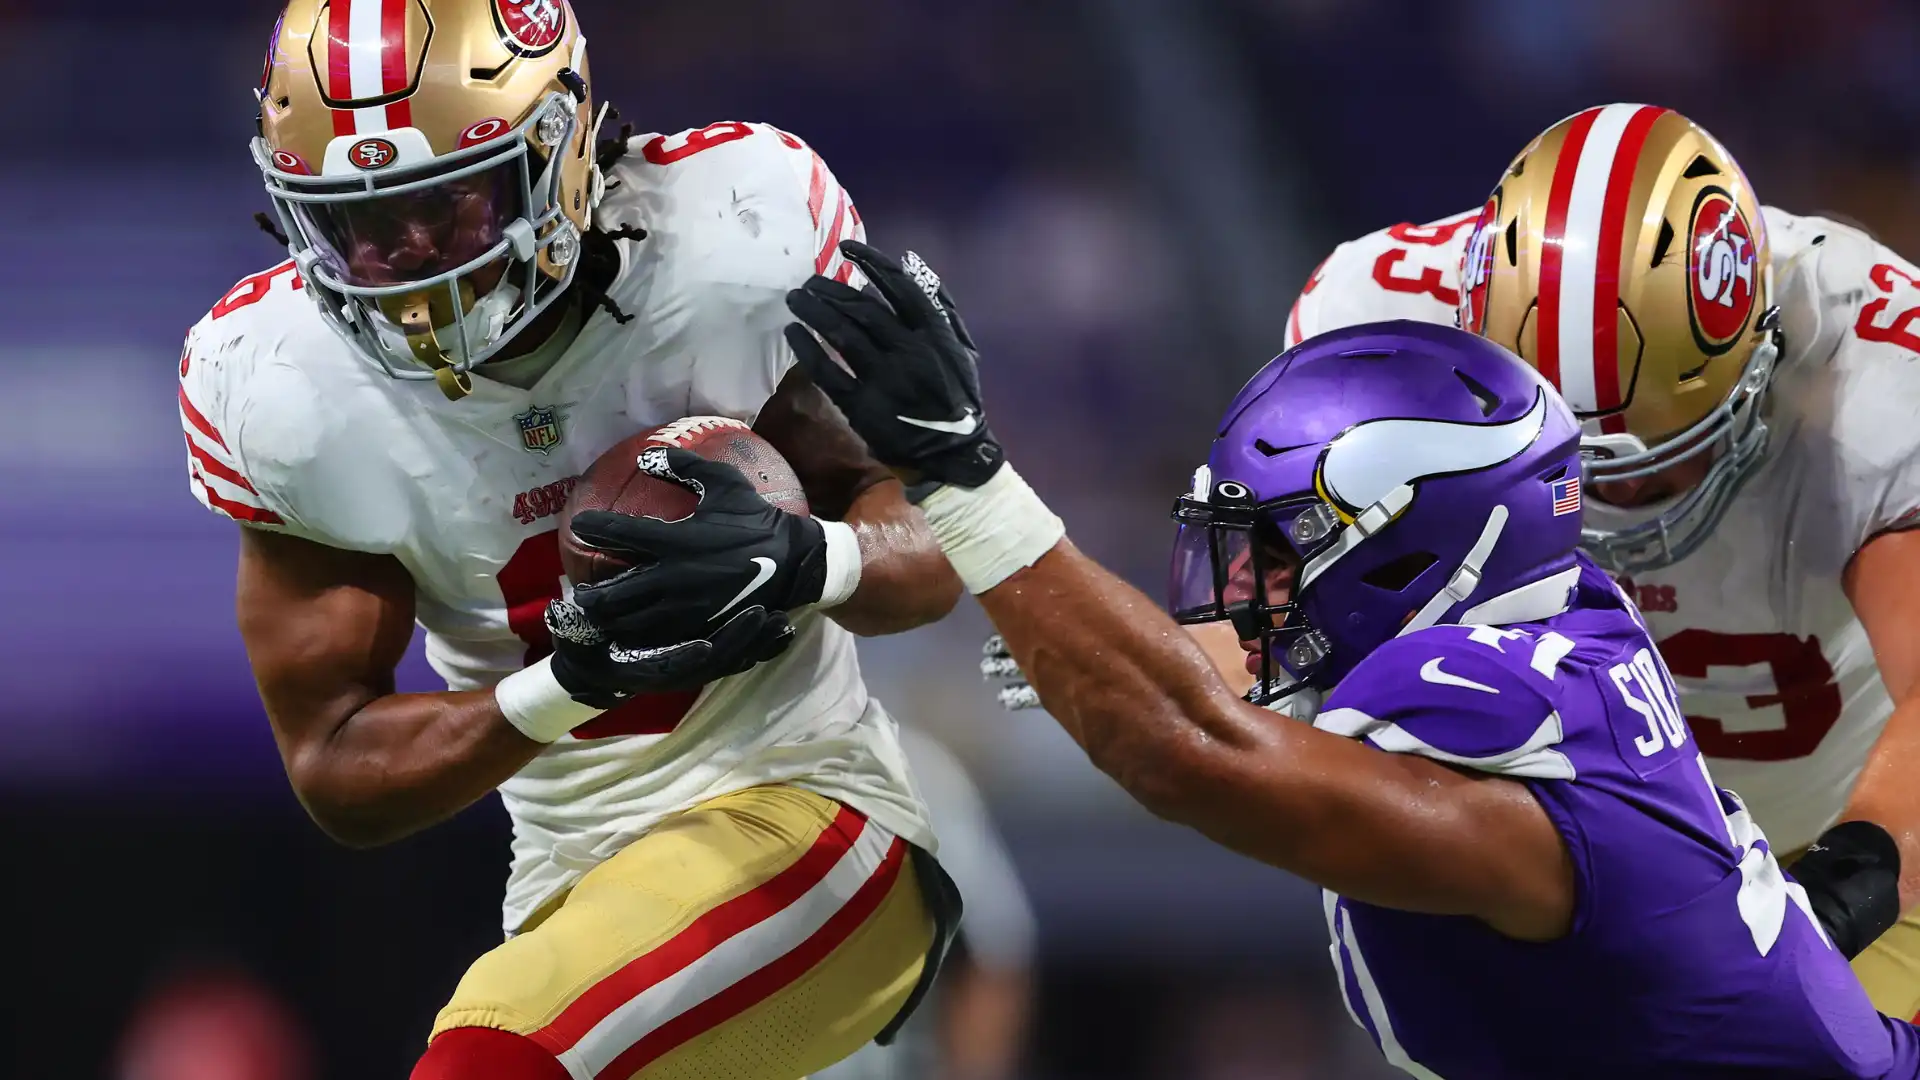 Watch 49ers vs Commanders NFL game: Livestream, TV coverage, kickoff time & radio station | Goal.com US